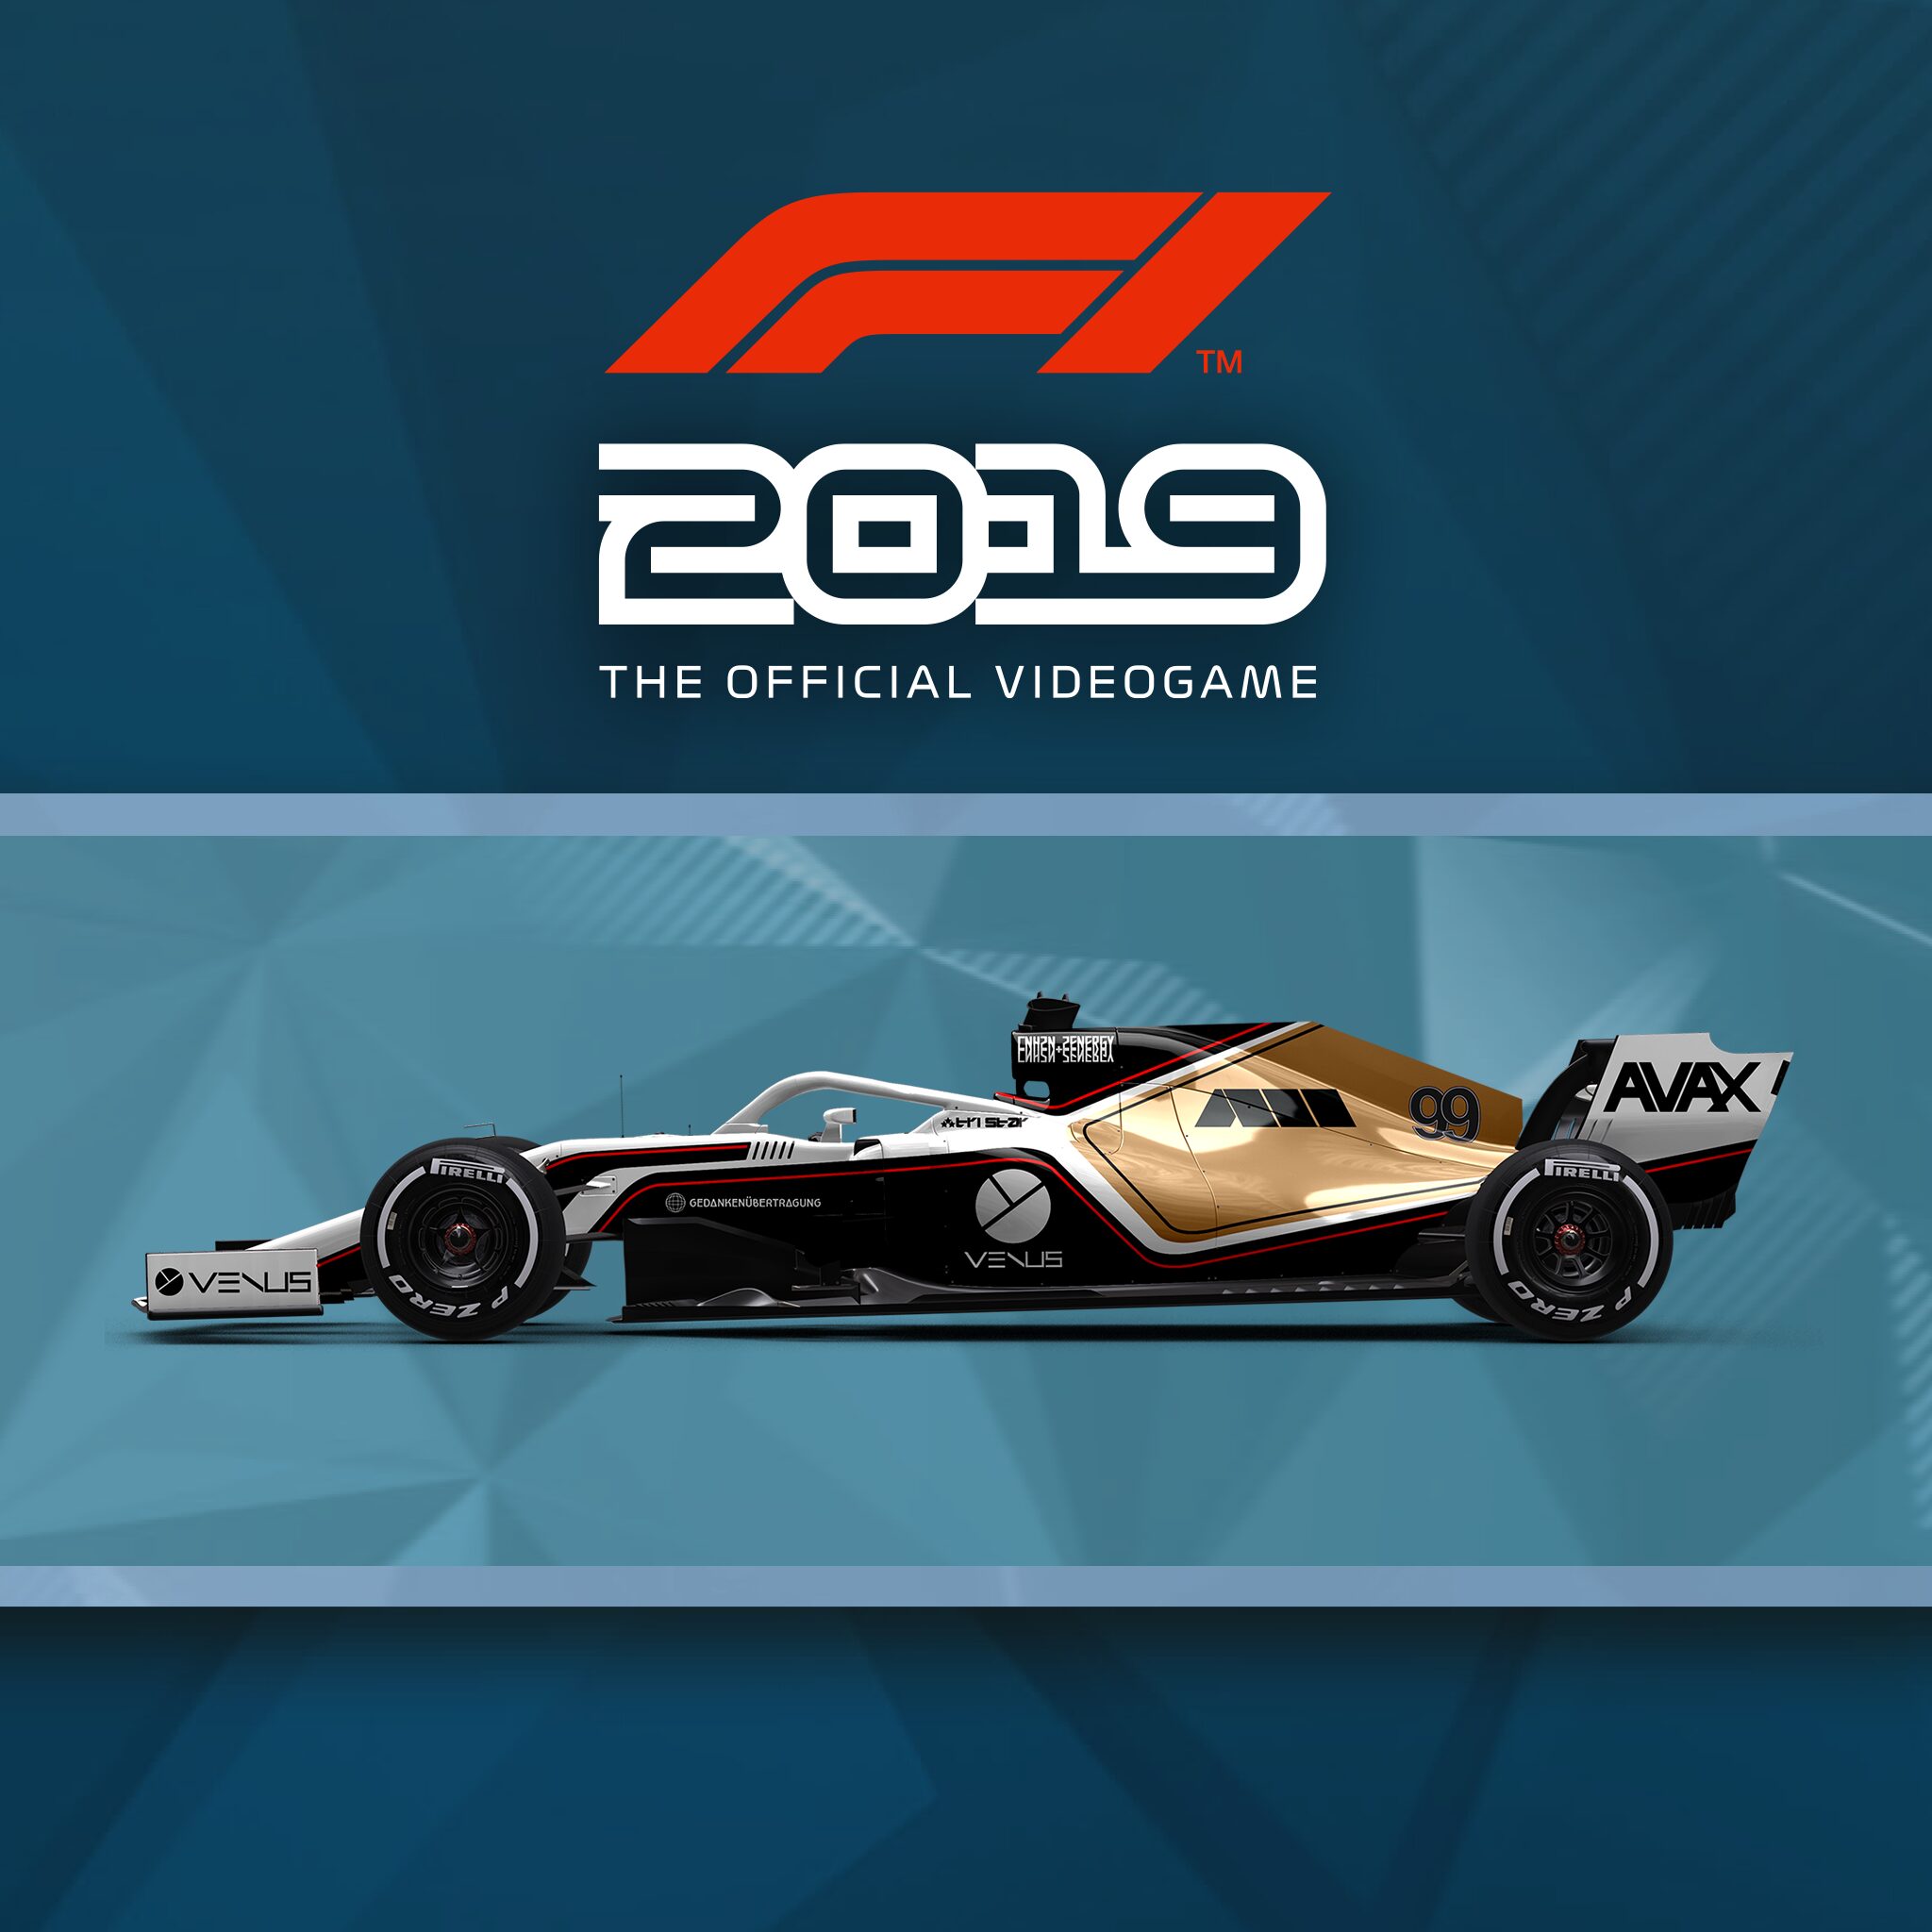 F1® 2019: Car Livery 'A11 - Plated'